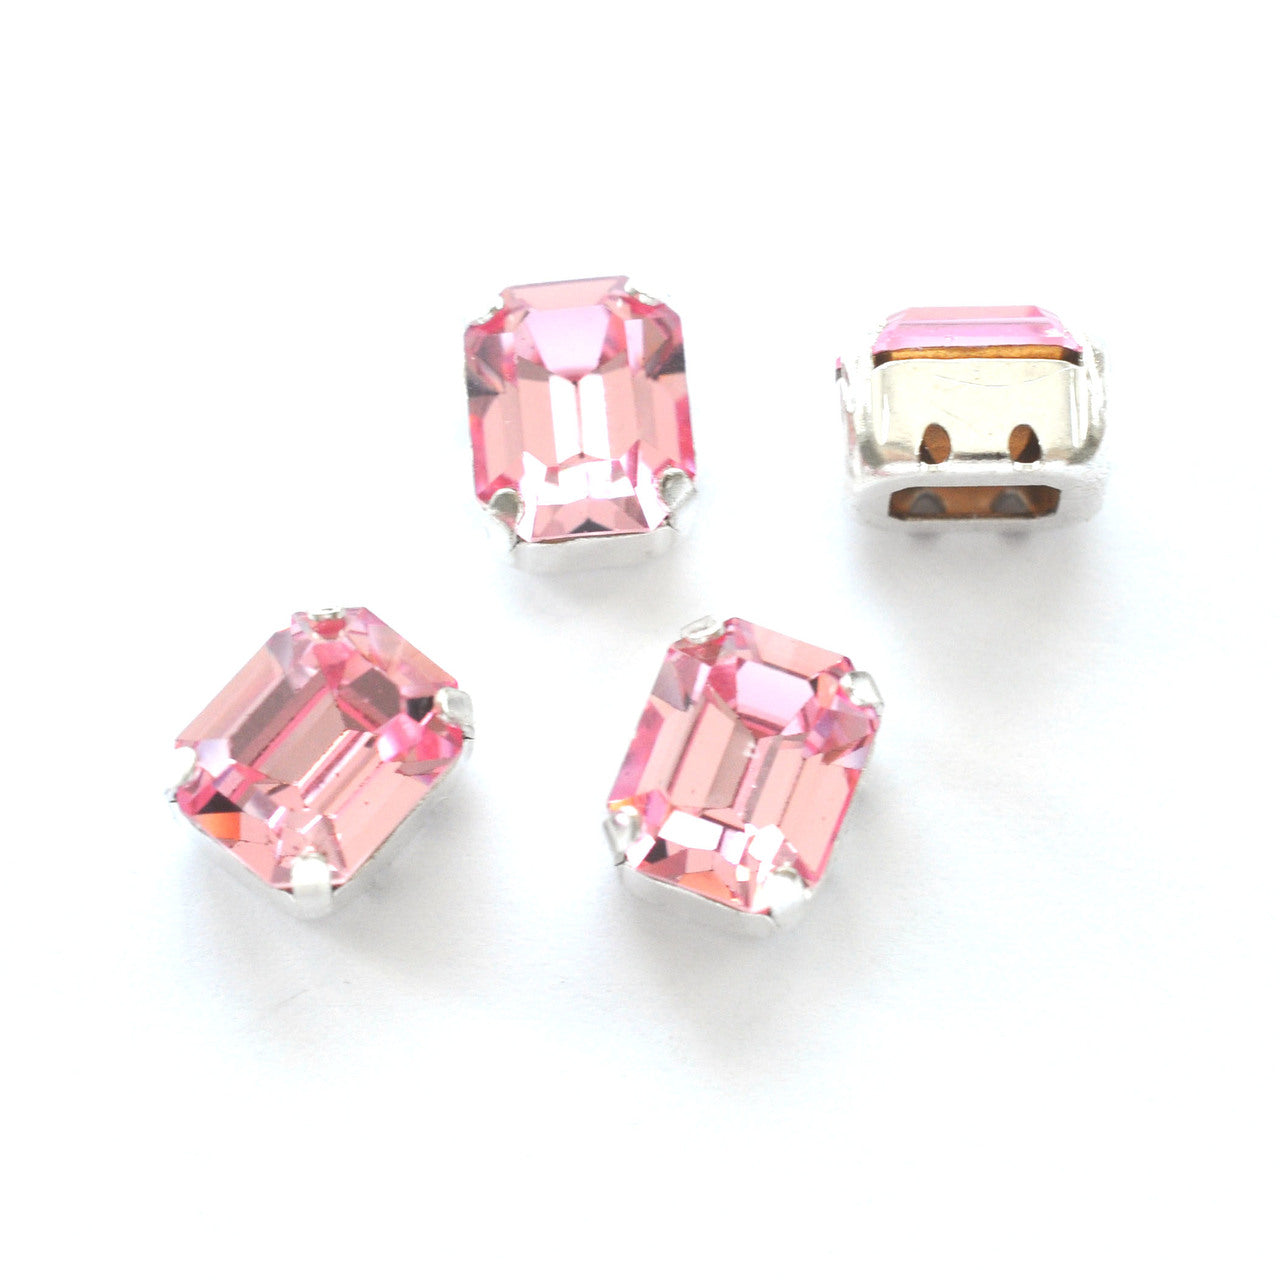 Light Rose 10x8mm Octagon Sew On Crystals - 4 Pieces